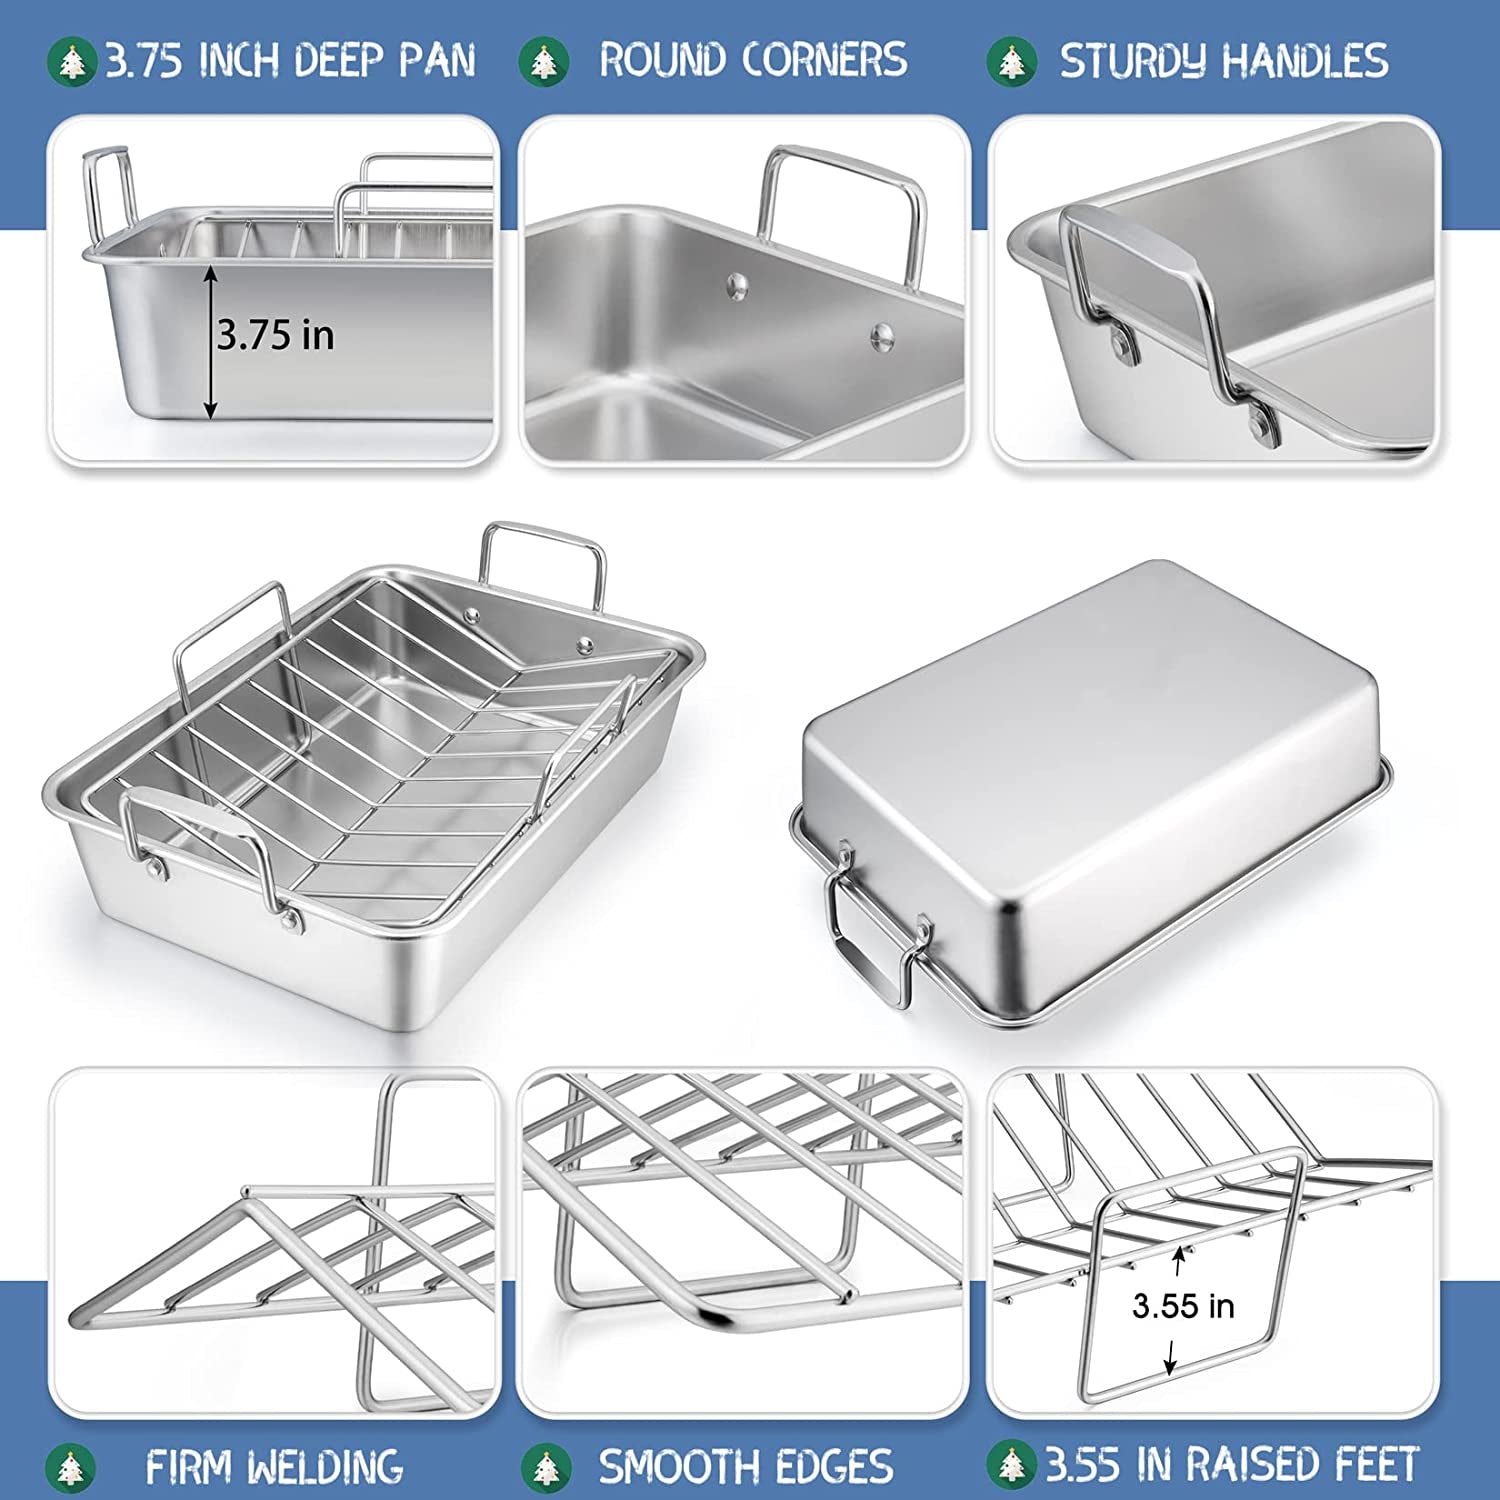 15¼" Roasting Pan with Rack, 7 PCS  Stainless Steel Roaster, Lasagna Pan with Cooling Flat & V-Shaped Baking Rack, Grilling Chicken Holder, Meat Shredding Claws,